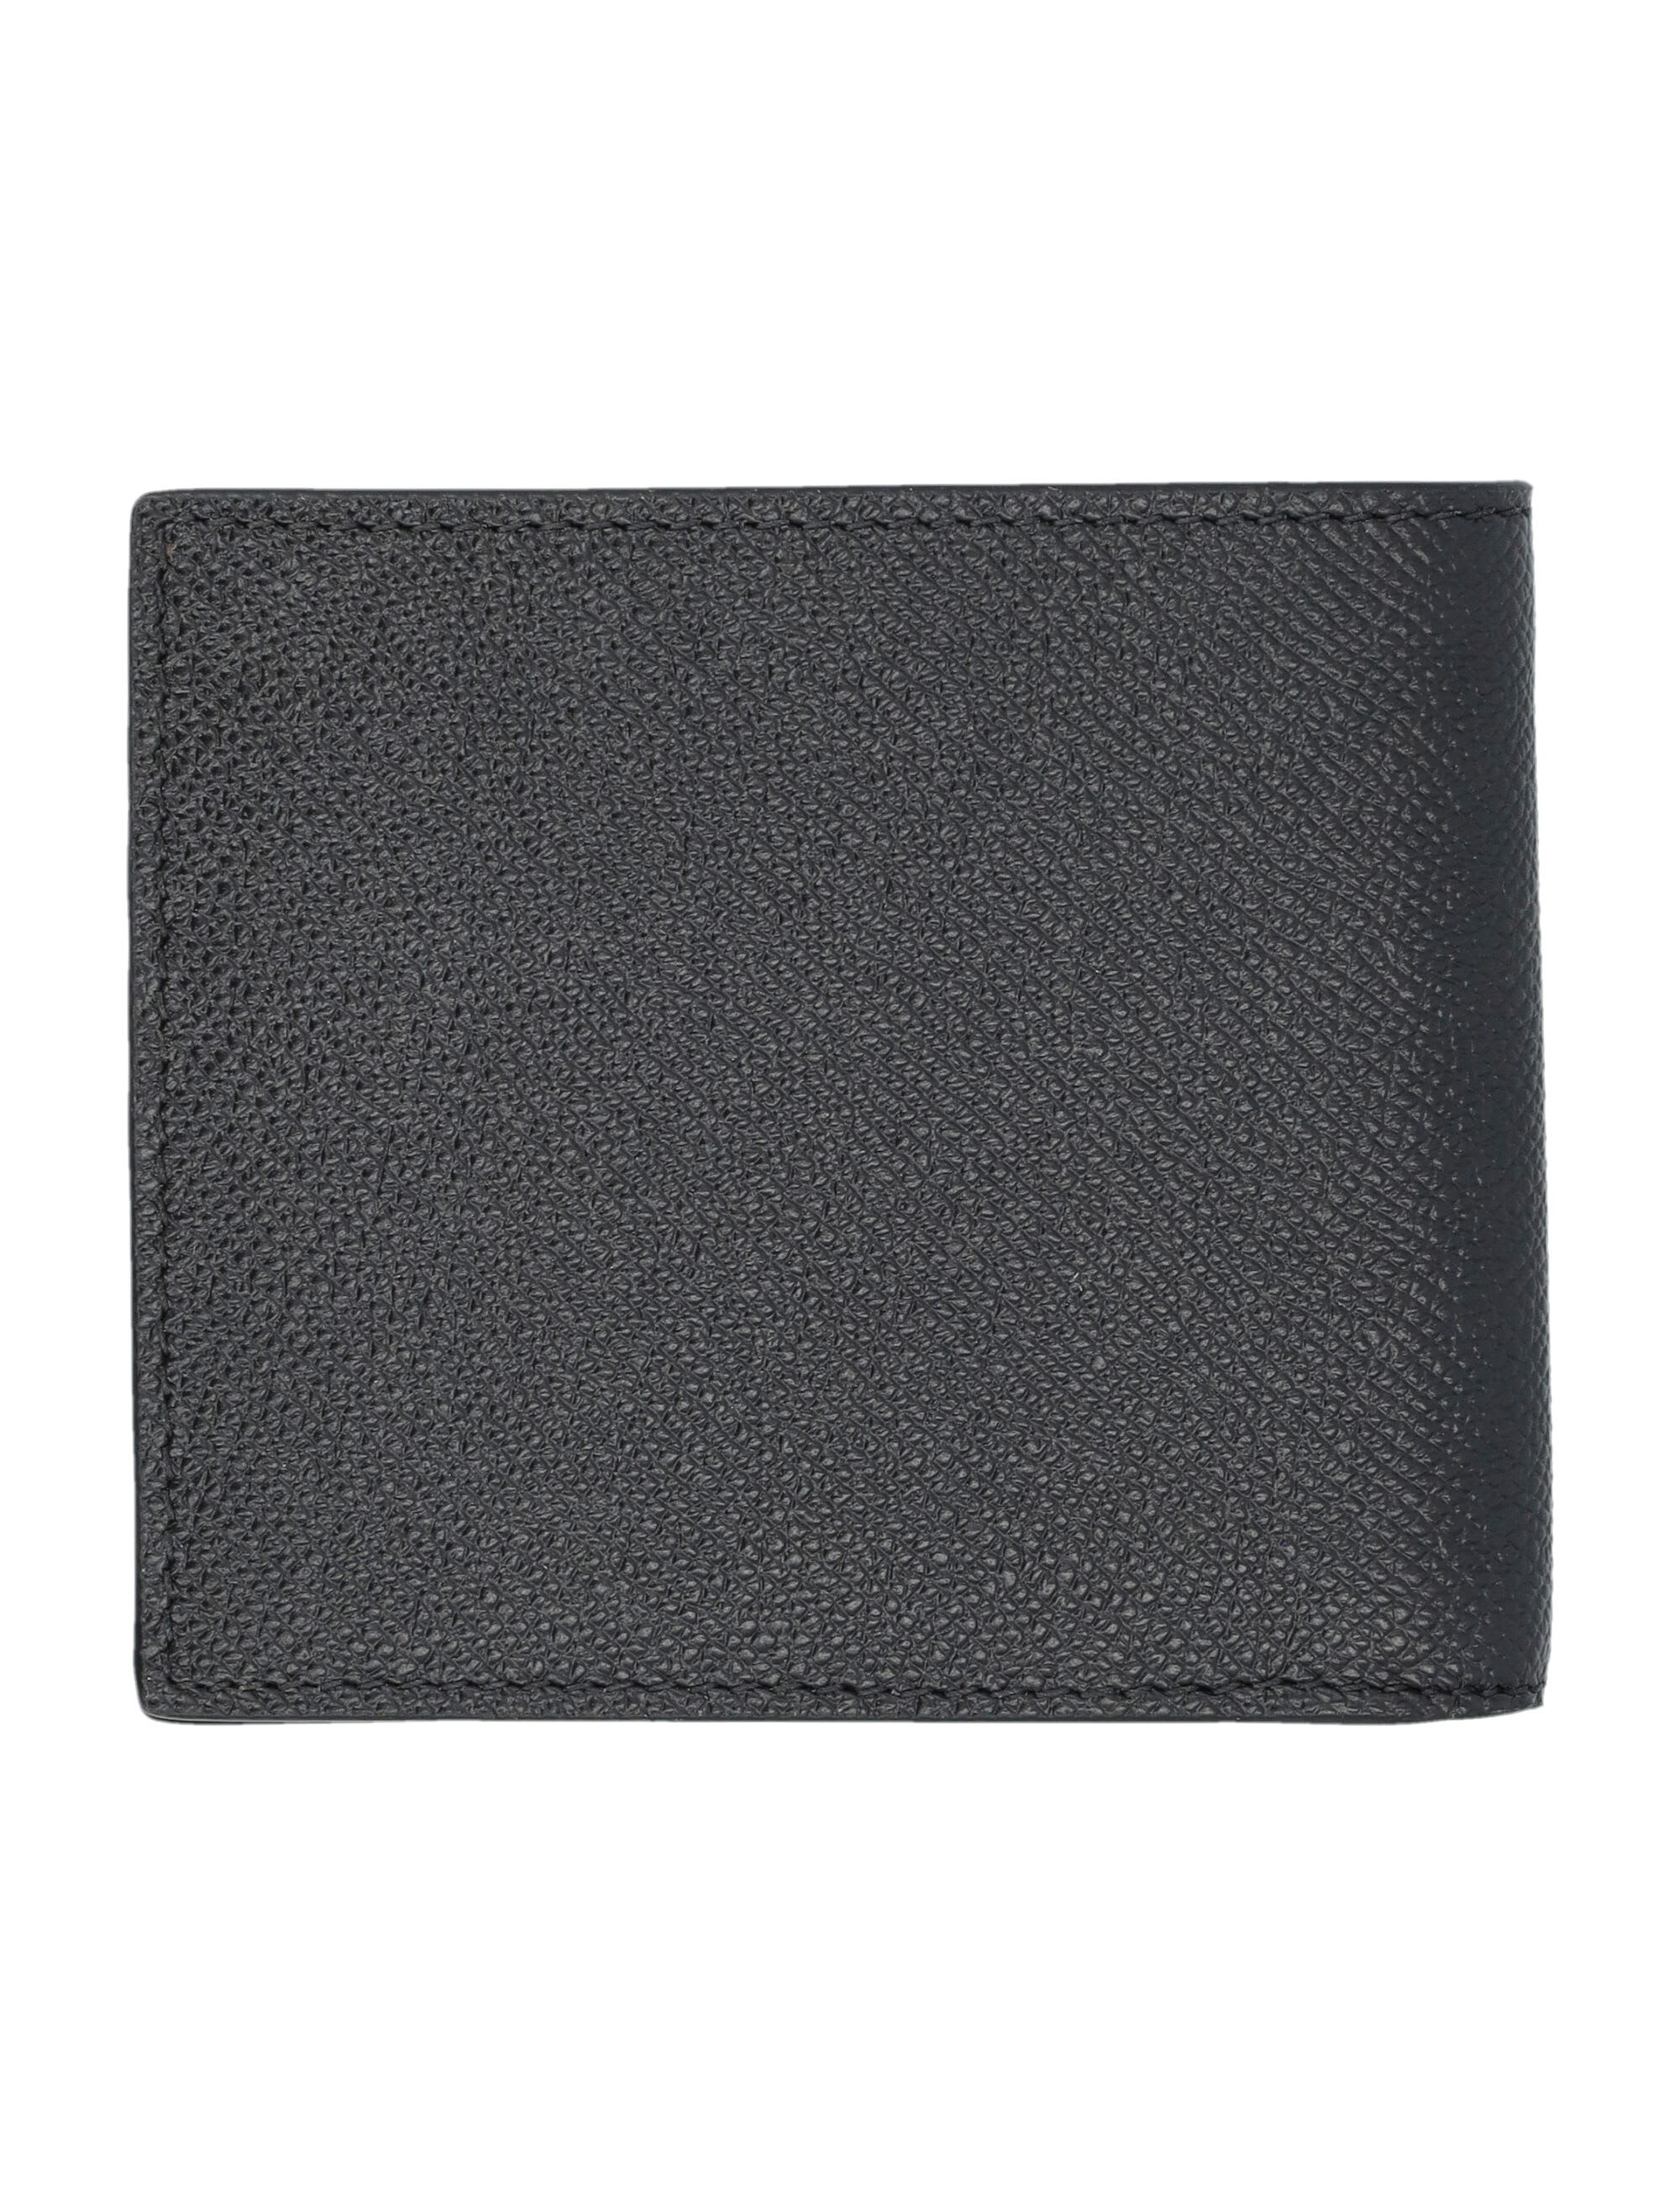 Burberry Grainy Leather Tb Bifold Wallet In Black/black